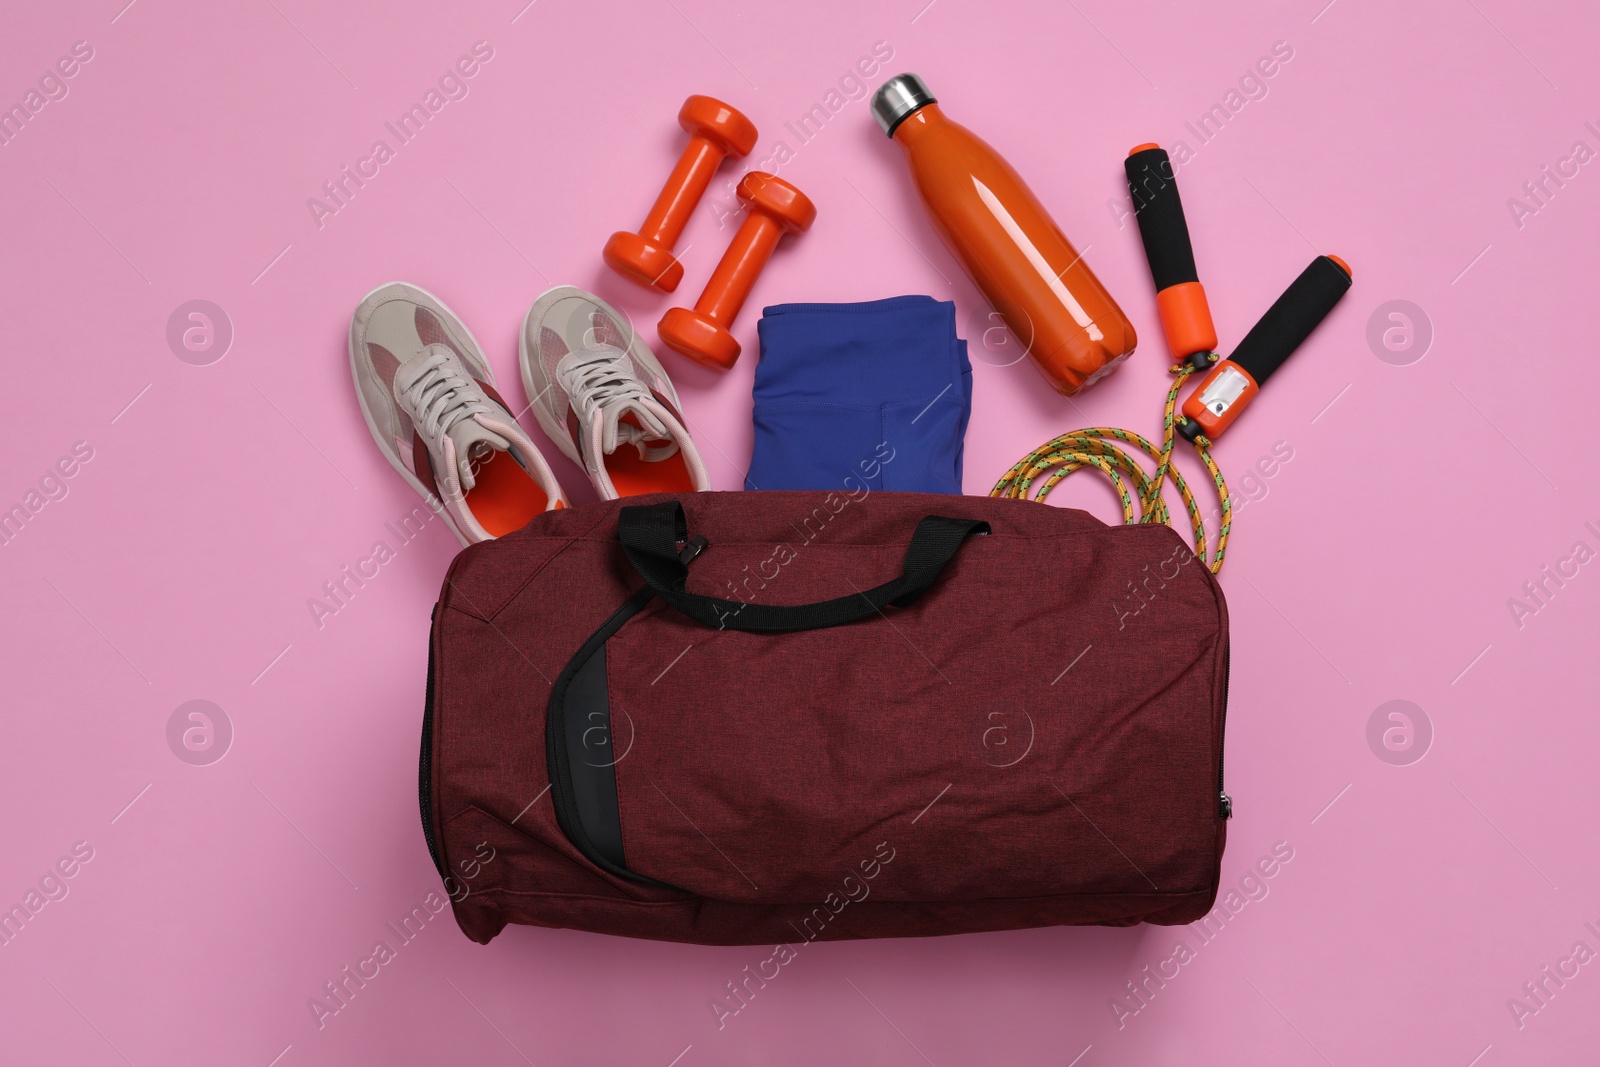 Photo of Gym bag and sports equipment on light pink background, flat lay